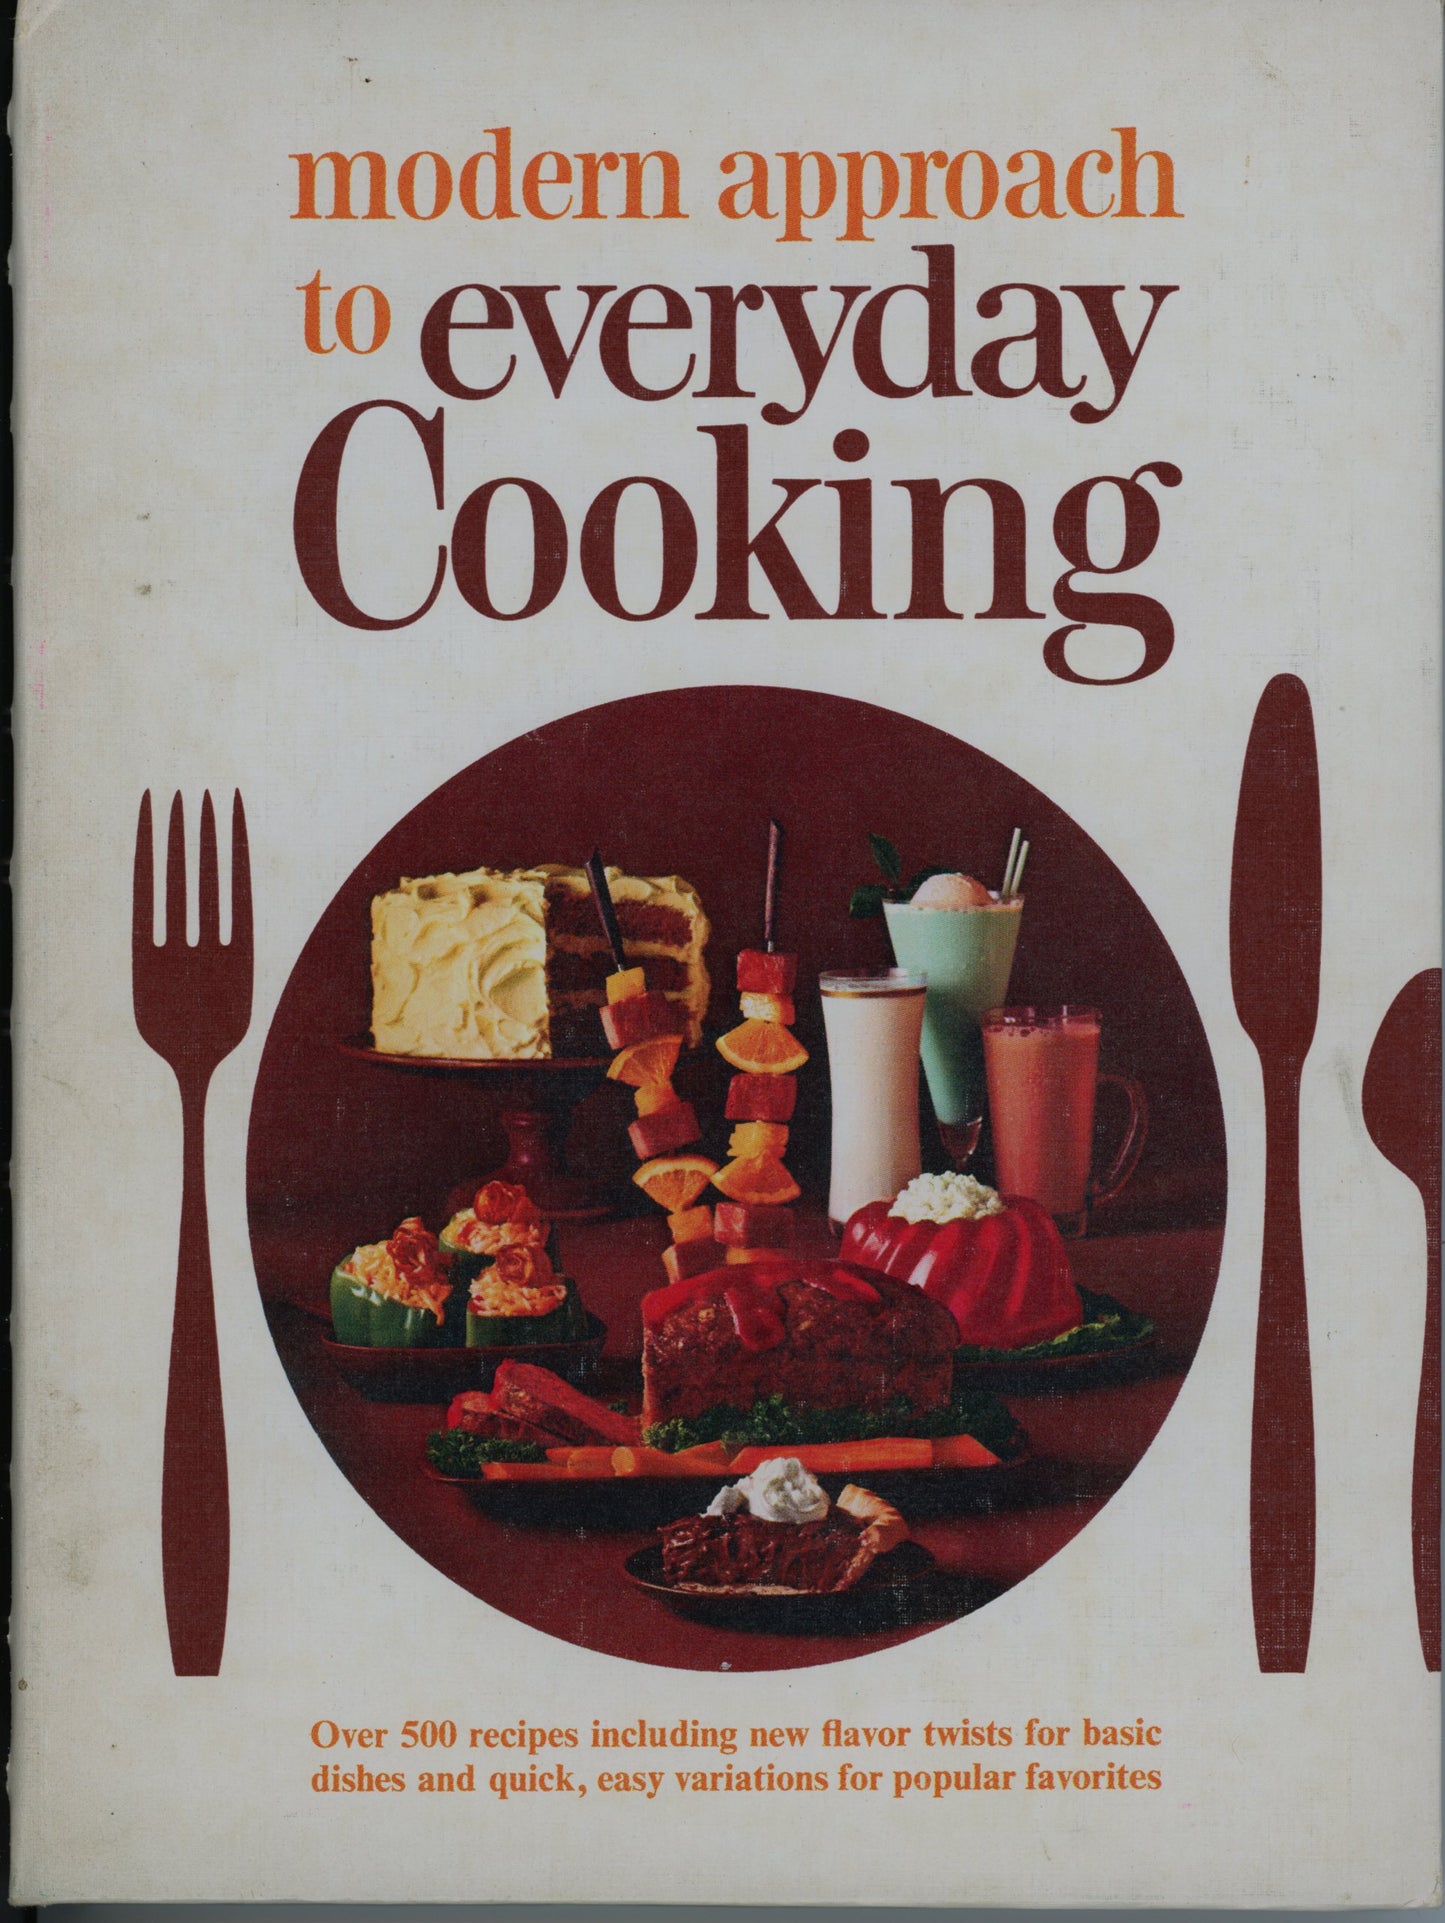 Modern Approach to EVERYDAY COOKING ©1966